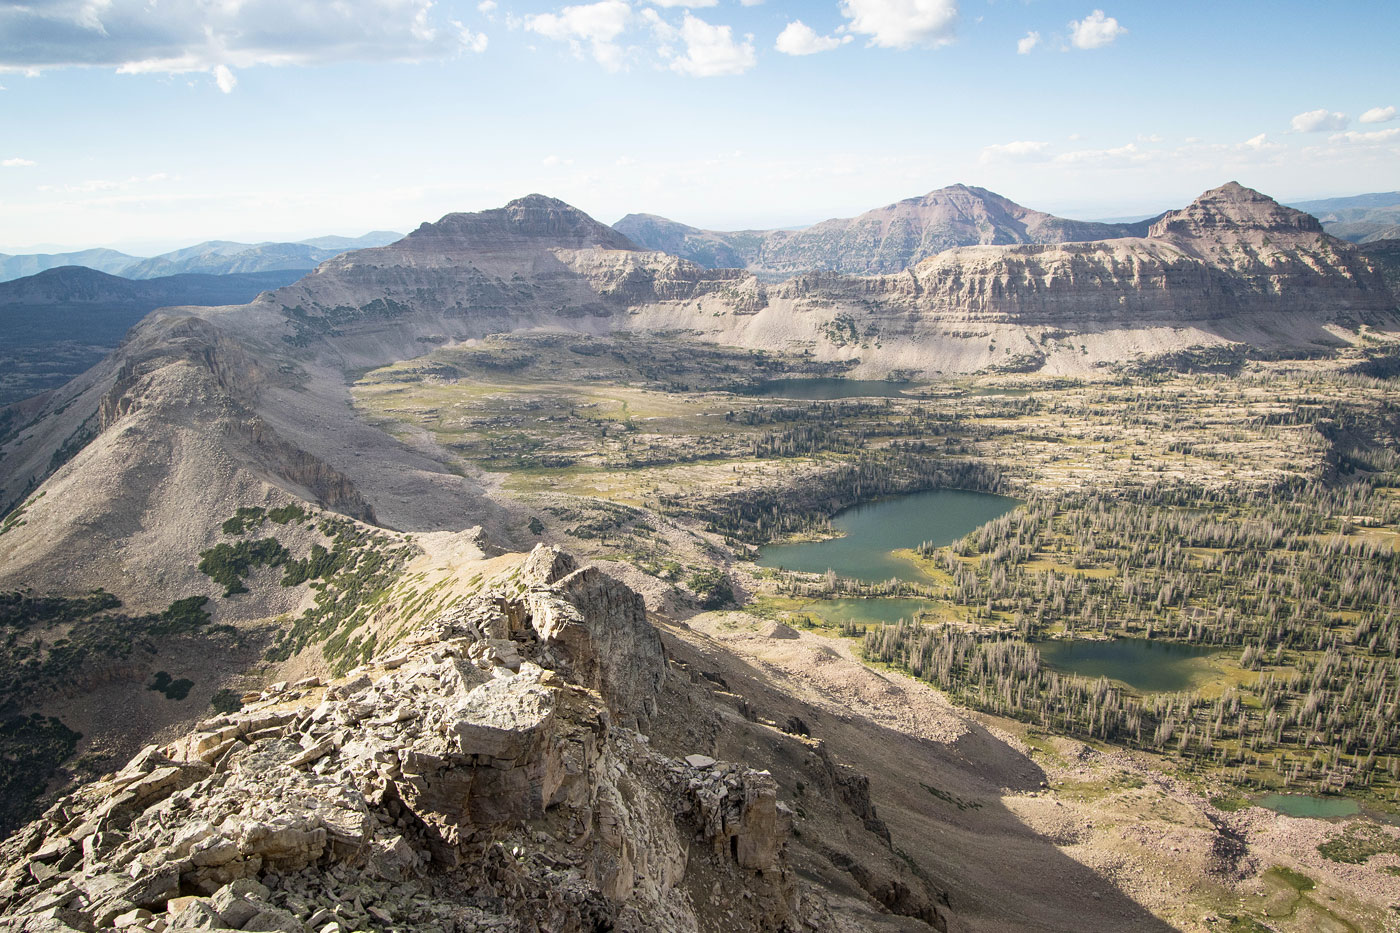 Hike Hayden Peak and Mount Agassiz in Uinta-Wasatch-Cache National Forest, Utah - Stav is Lost